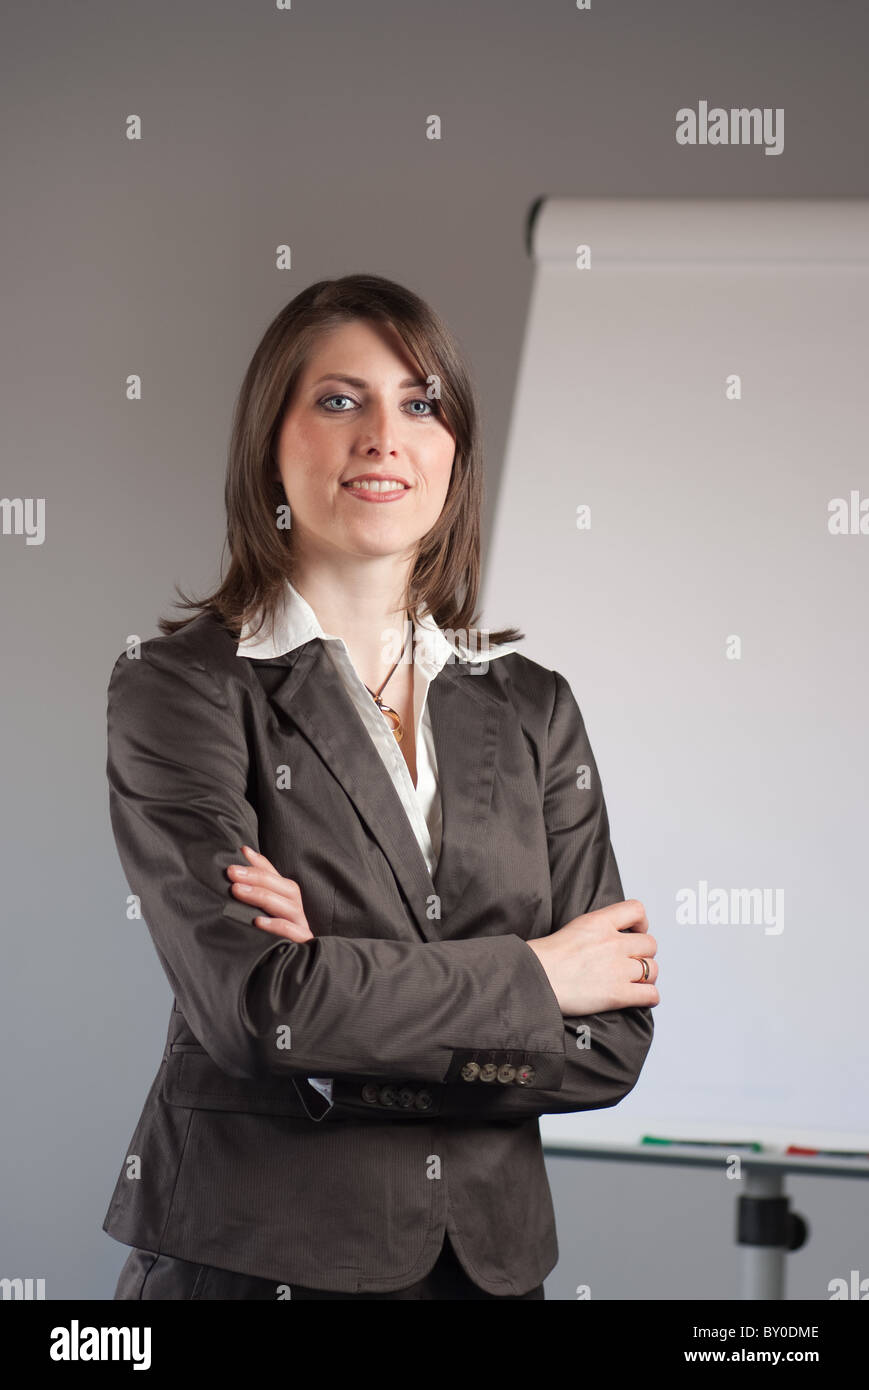 A young business woman standing in front of a flipchart Stock Photo